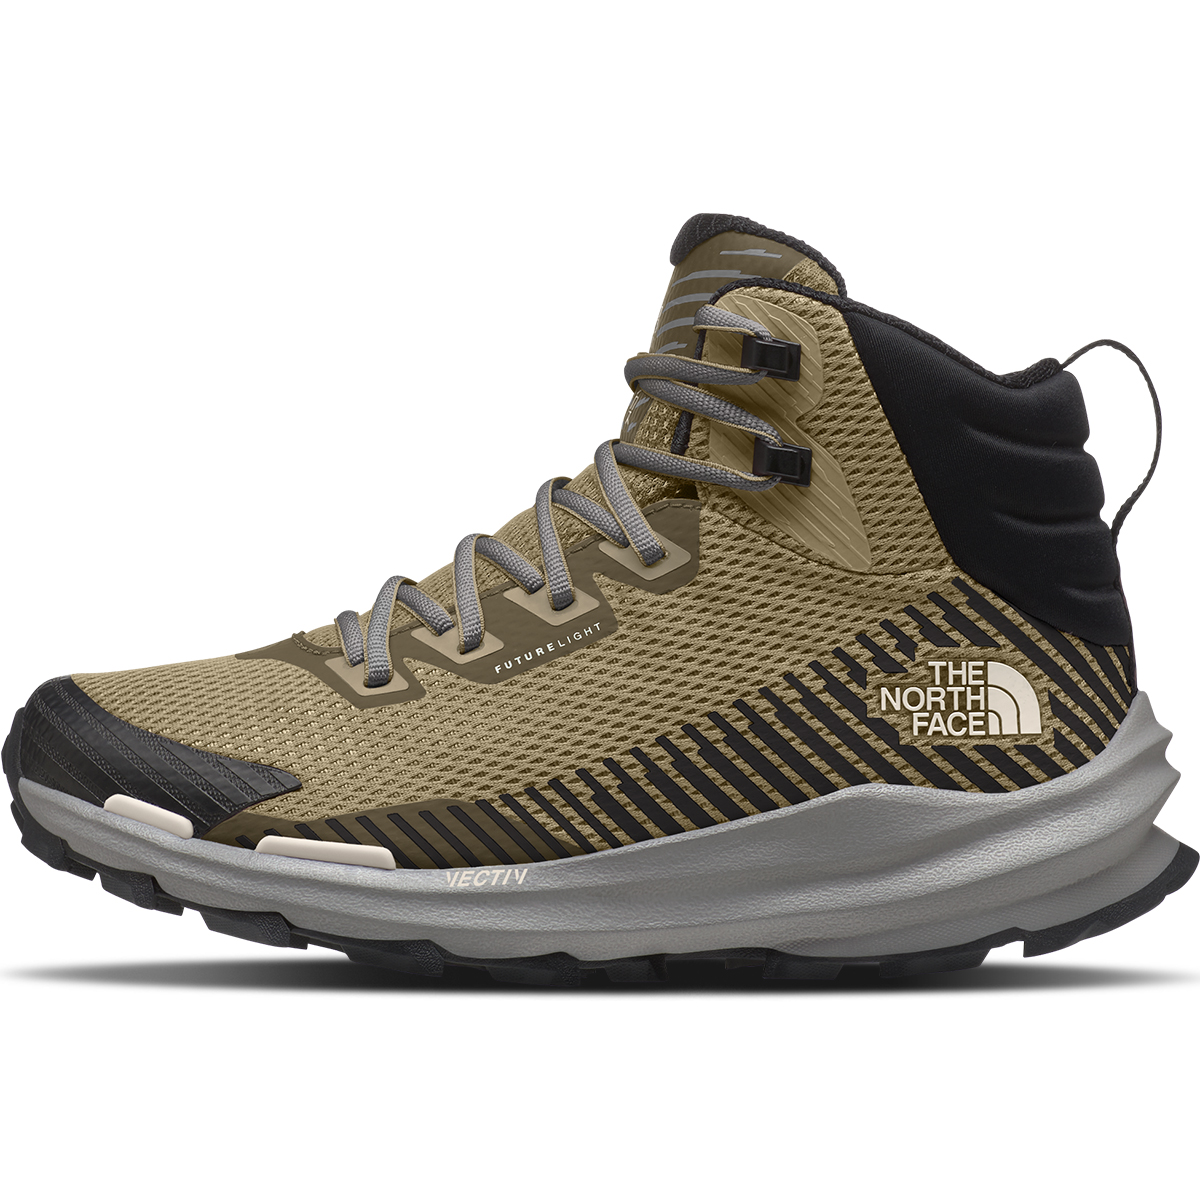 The North Face Women's Vectiv Fastpack Mid Futurelight Hiking Boots